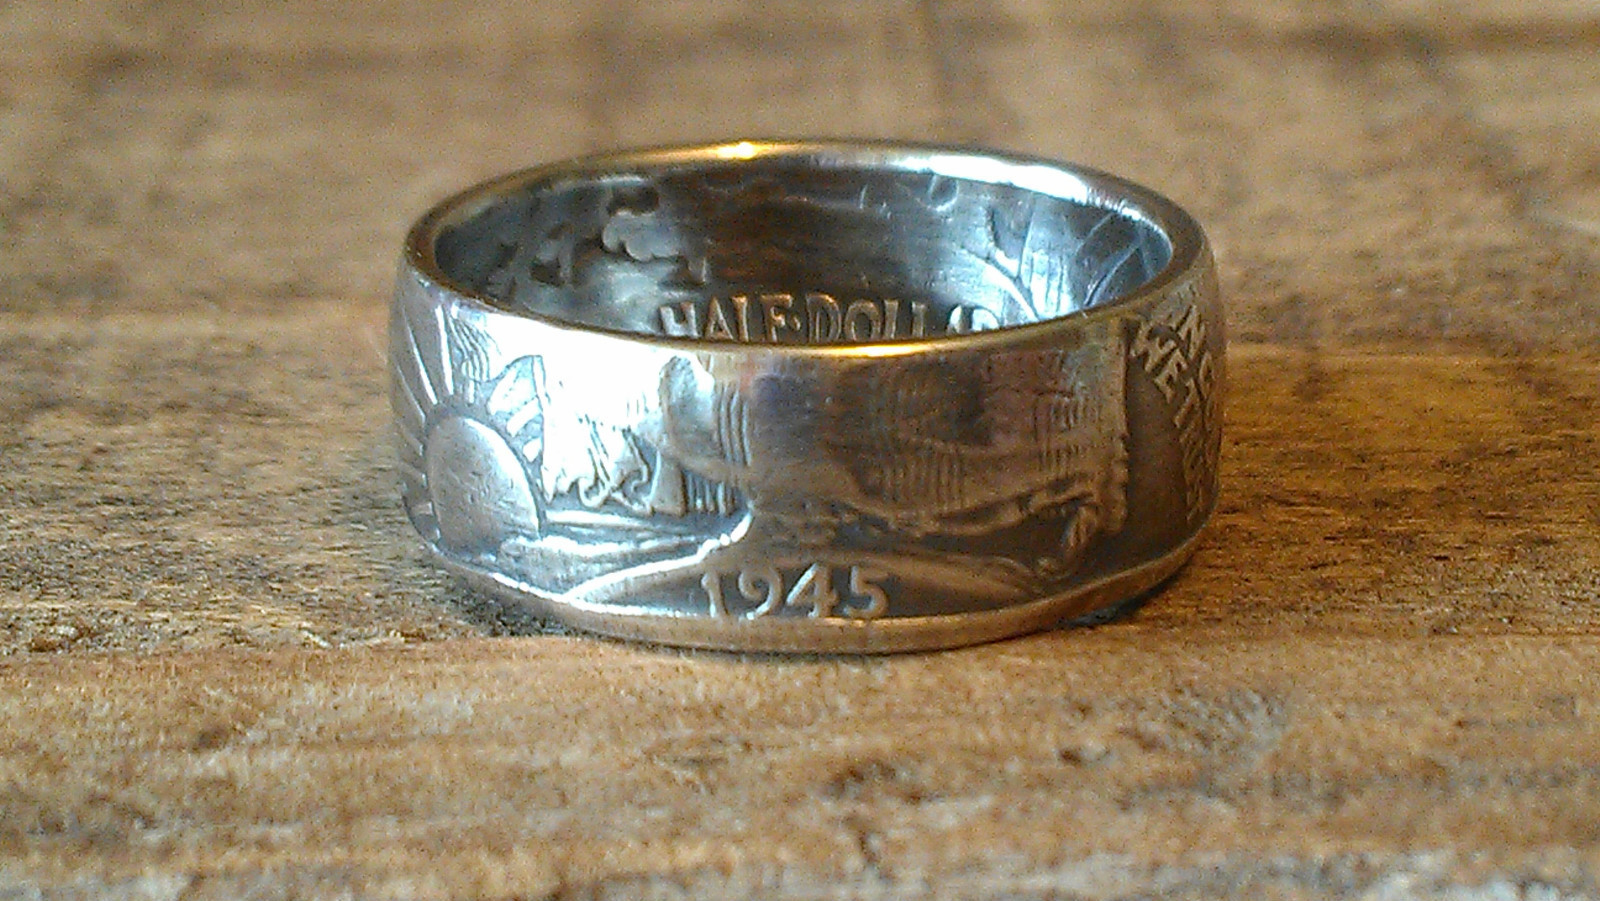 coin ring